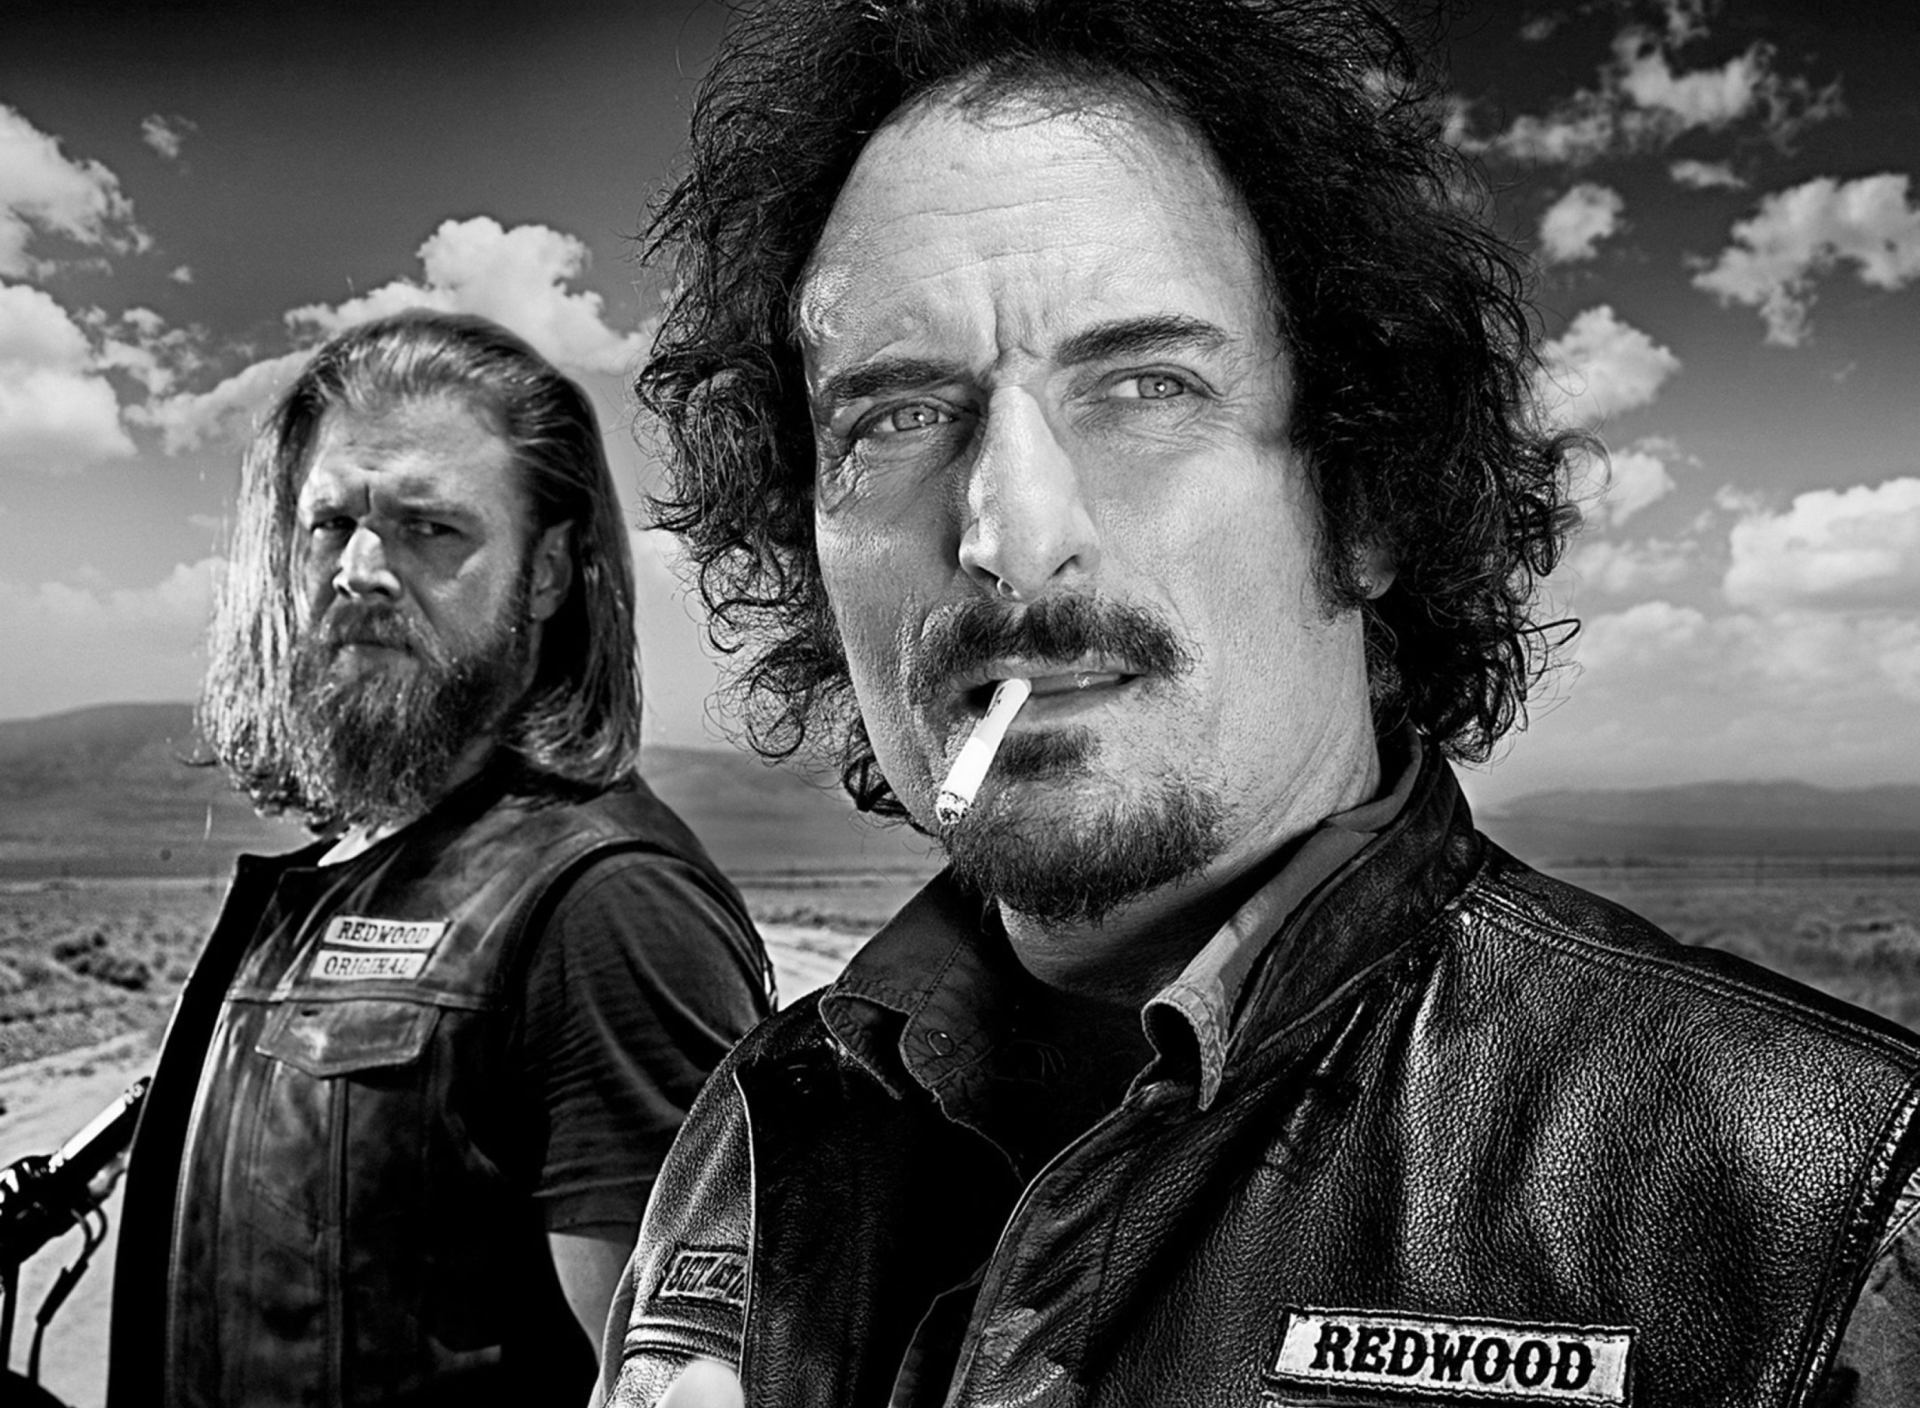 Opie and Tig in Sons of Anarchy screenshot #1 1920x1408